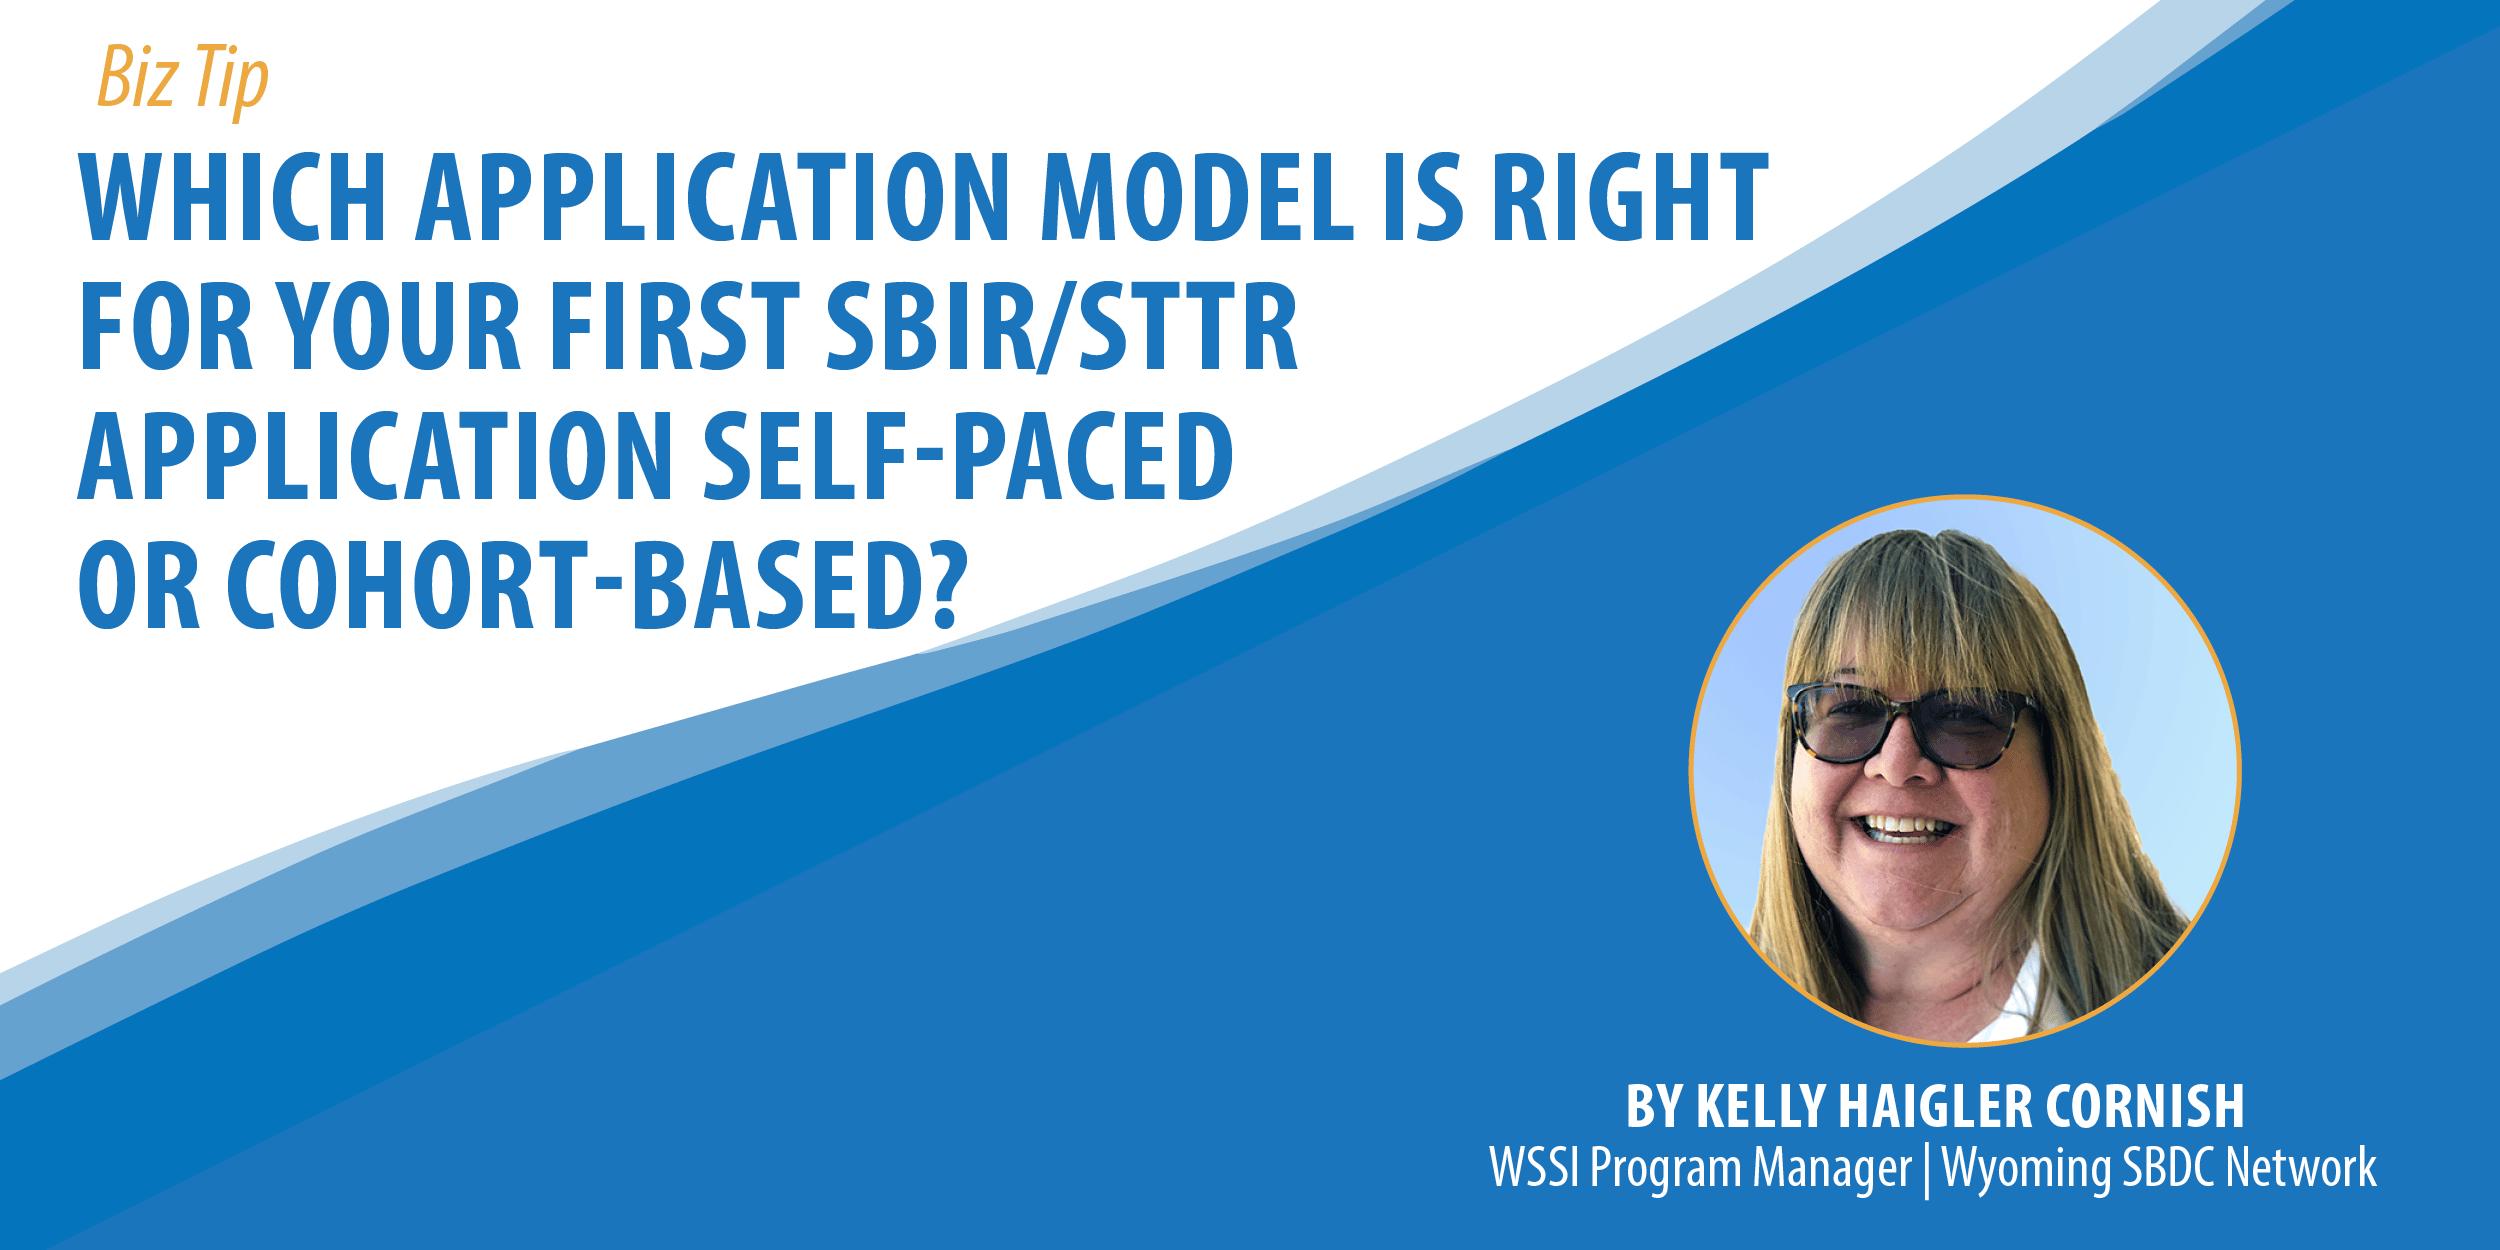 Which application model is right for your first SBIR/STTR Application, self-paced or cohort-based?